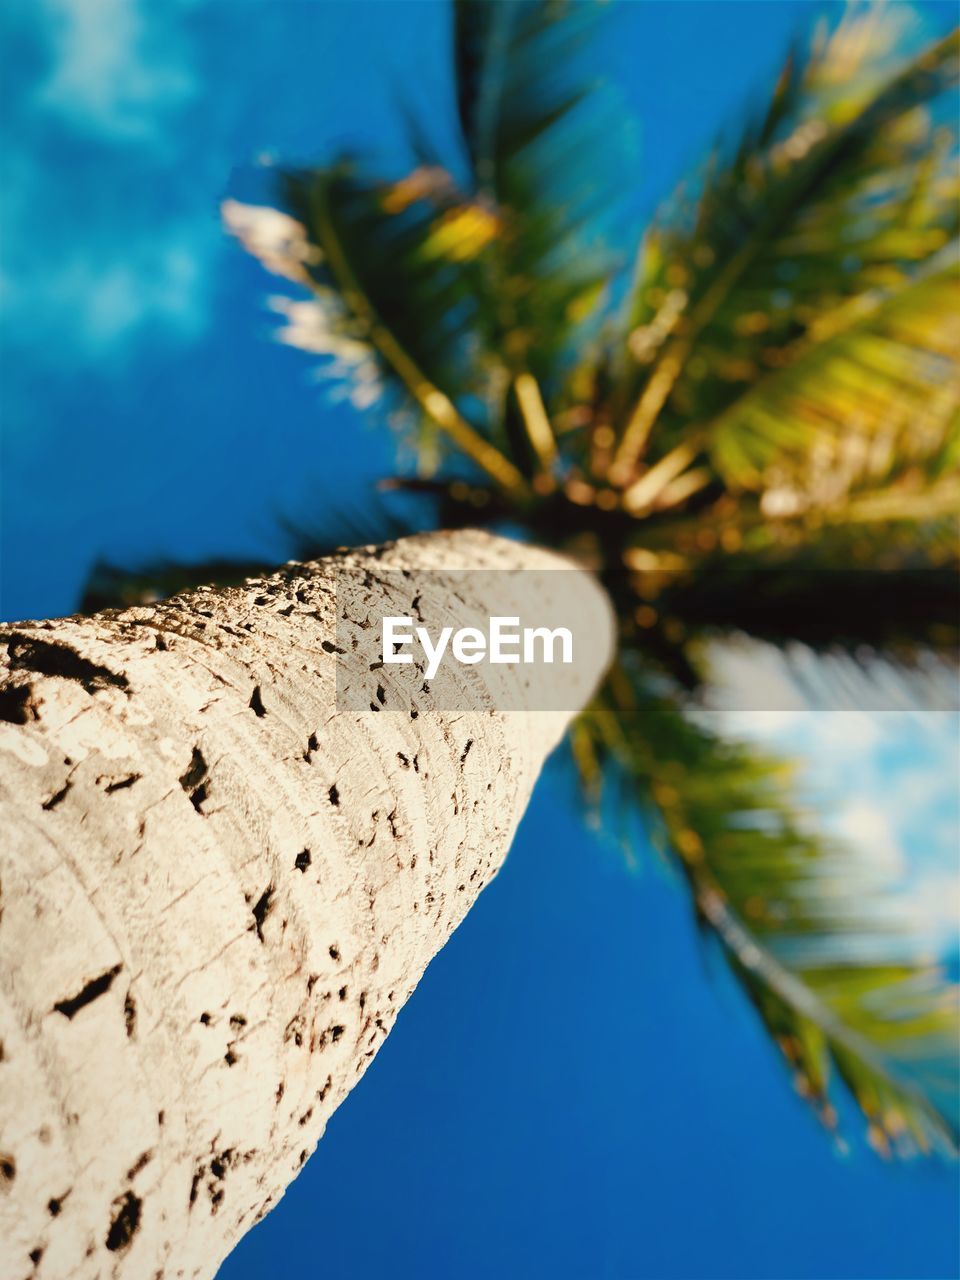 LOW ANGLE VIEW OF PALM TREES AGAINST CLEAR BLUE SKY